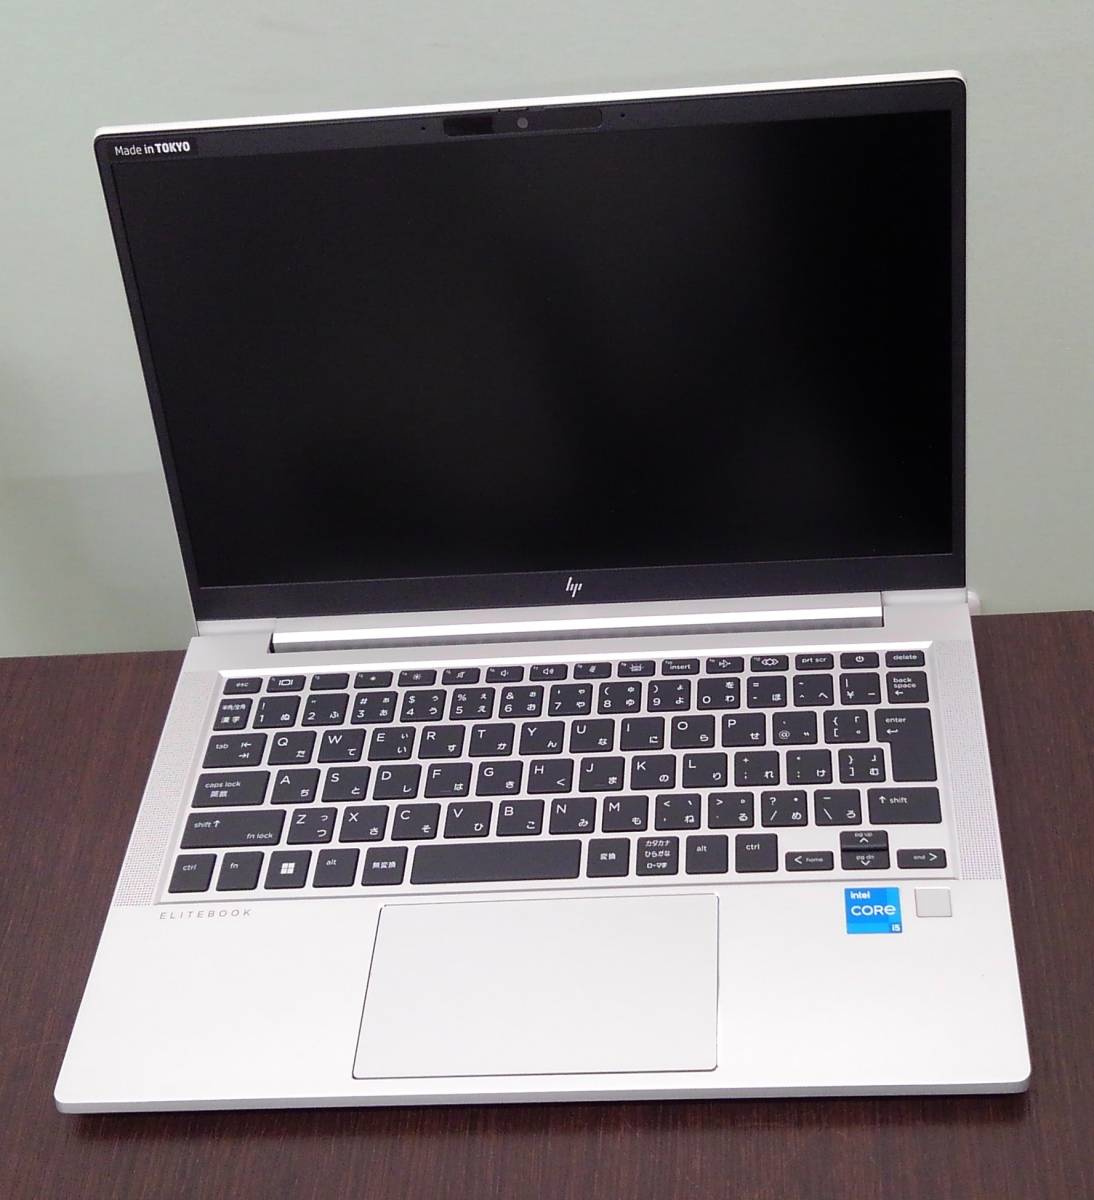 [8227]HP EliteBook 630 G9 laptop personal computer present condition goods including in a package un- possible together transactions un- possible 